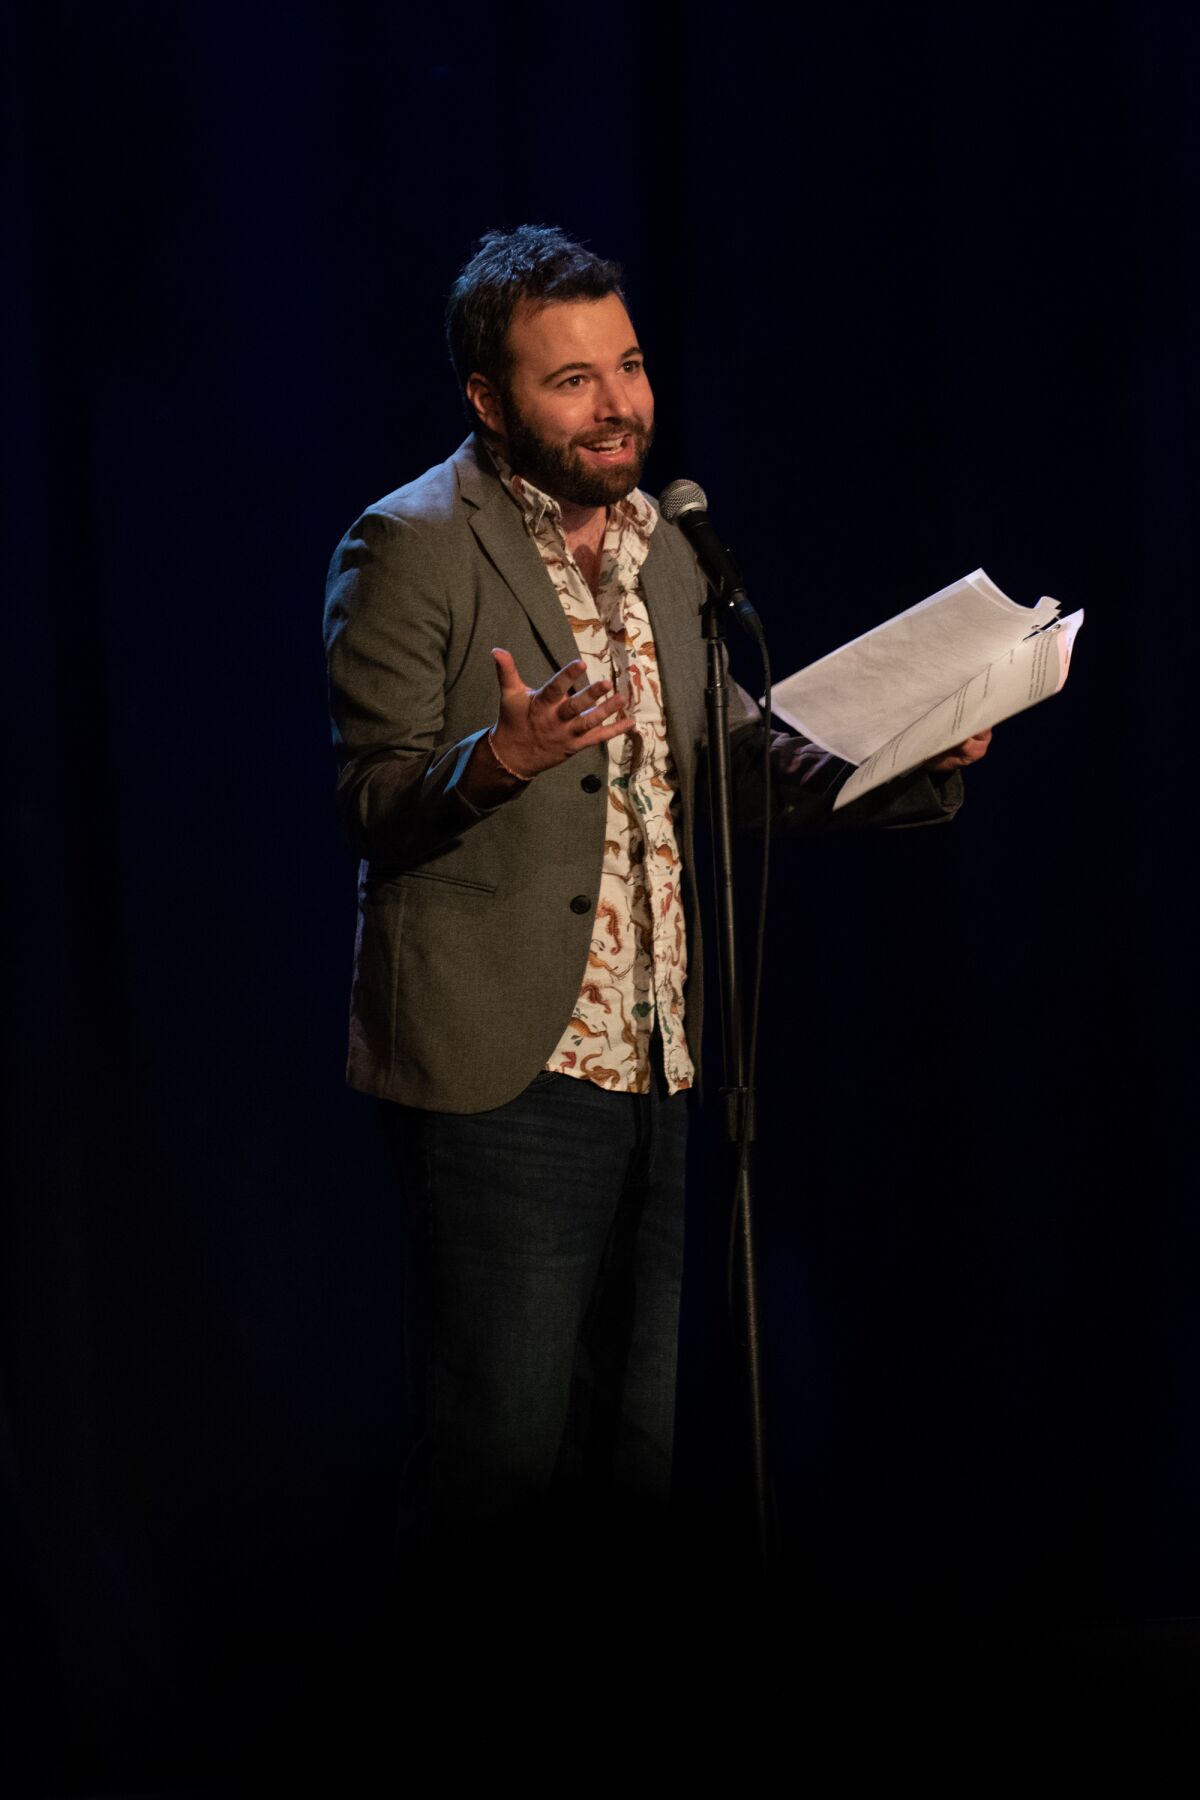 A man at a microphone holds a script.